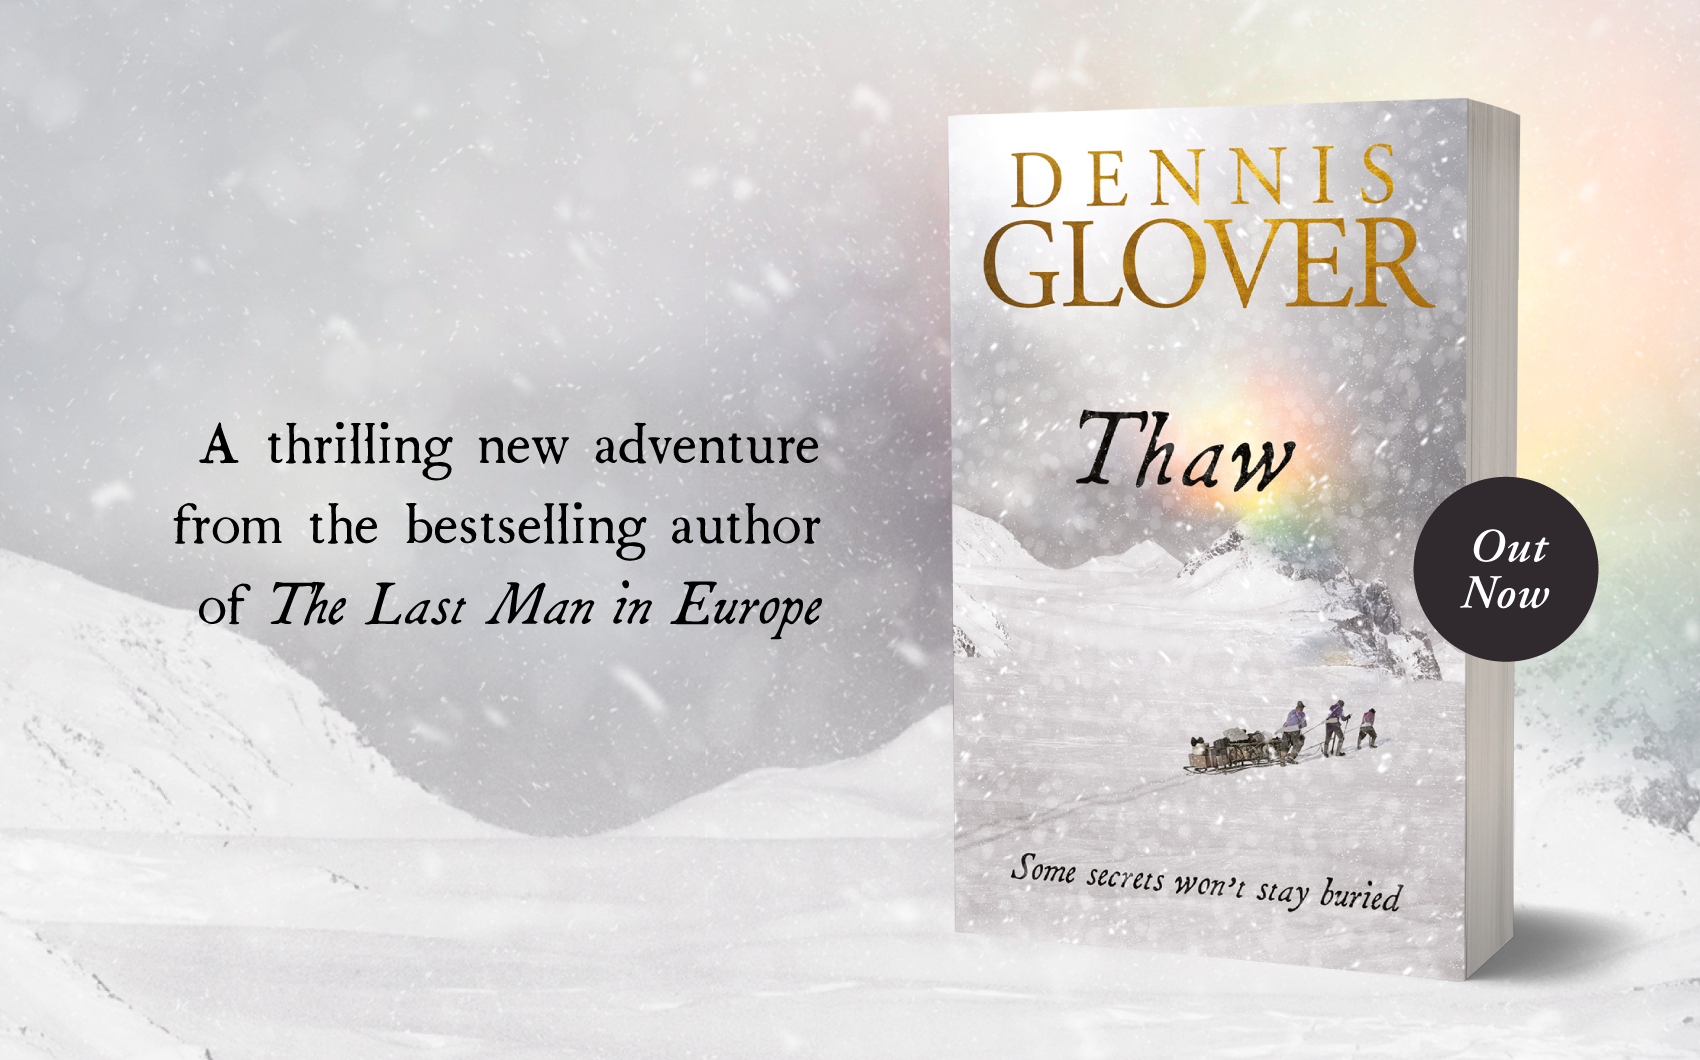 Out now: Thaw